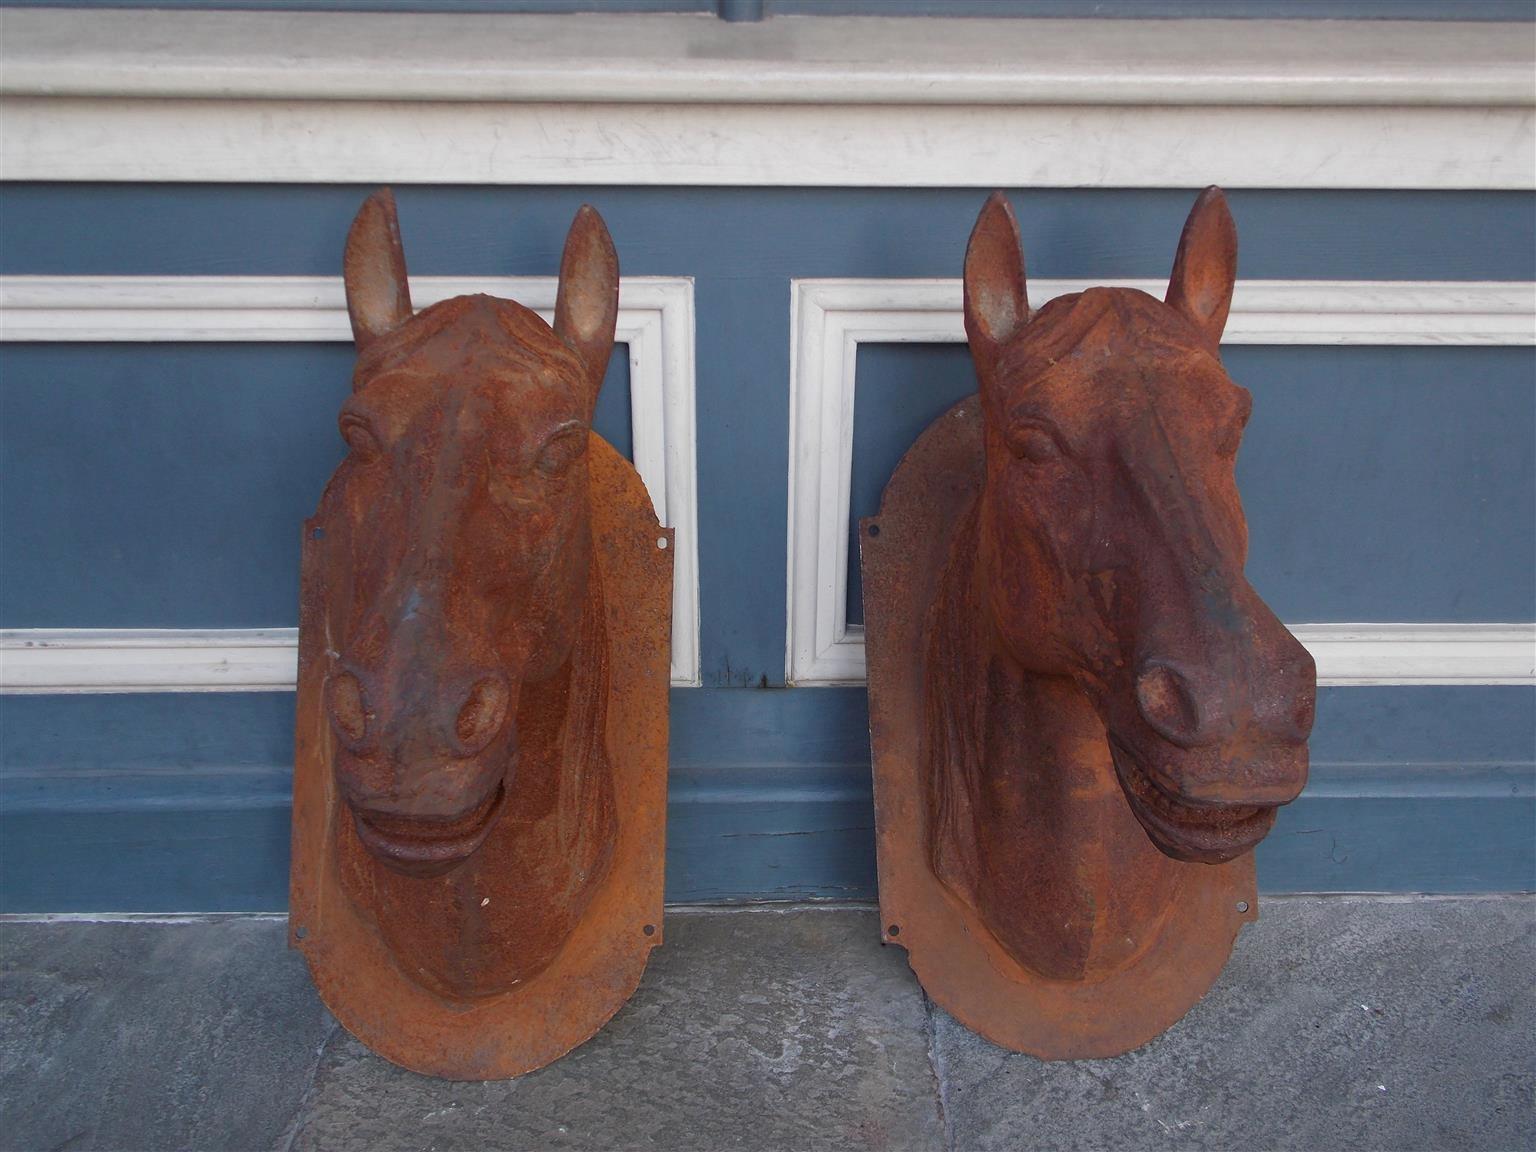 Pair of American cast iron horse heads with oval mounts, Mid-19th century. Great for mounting on Stable, Gates, or Entrance Columns.